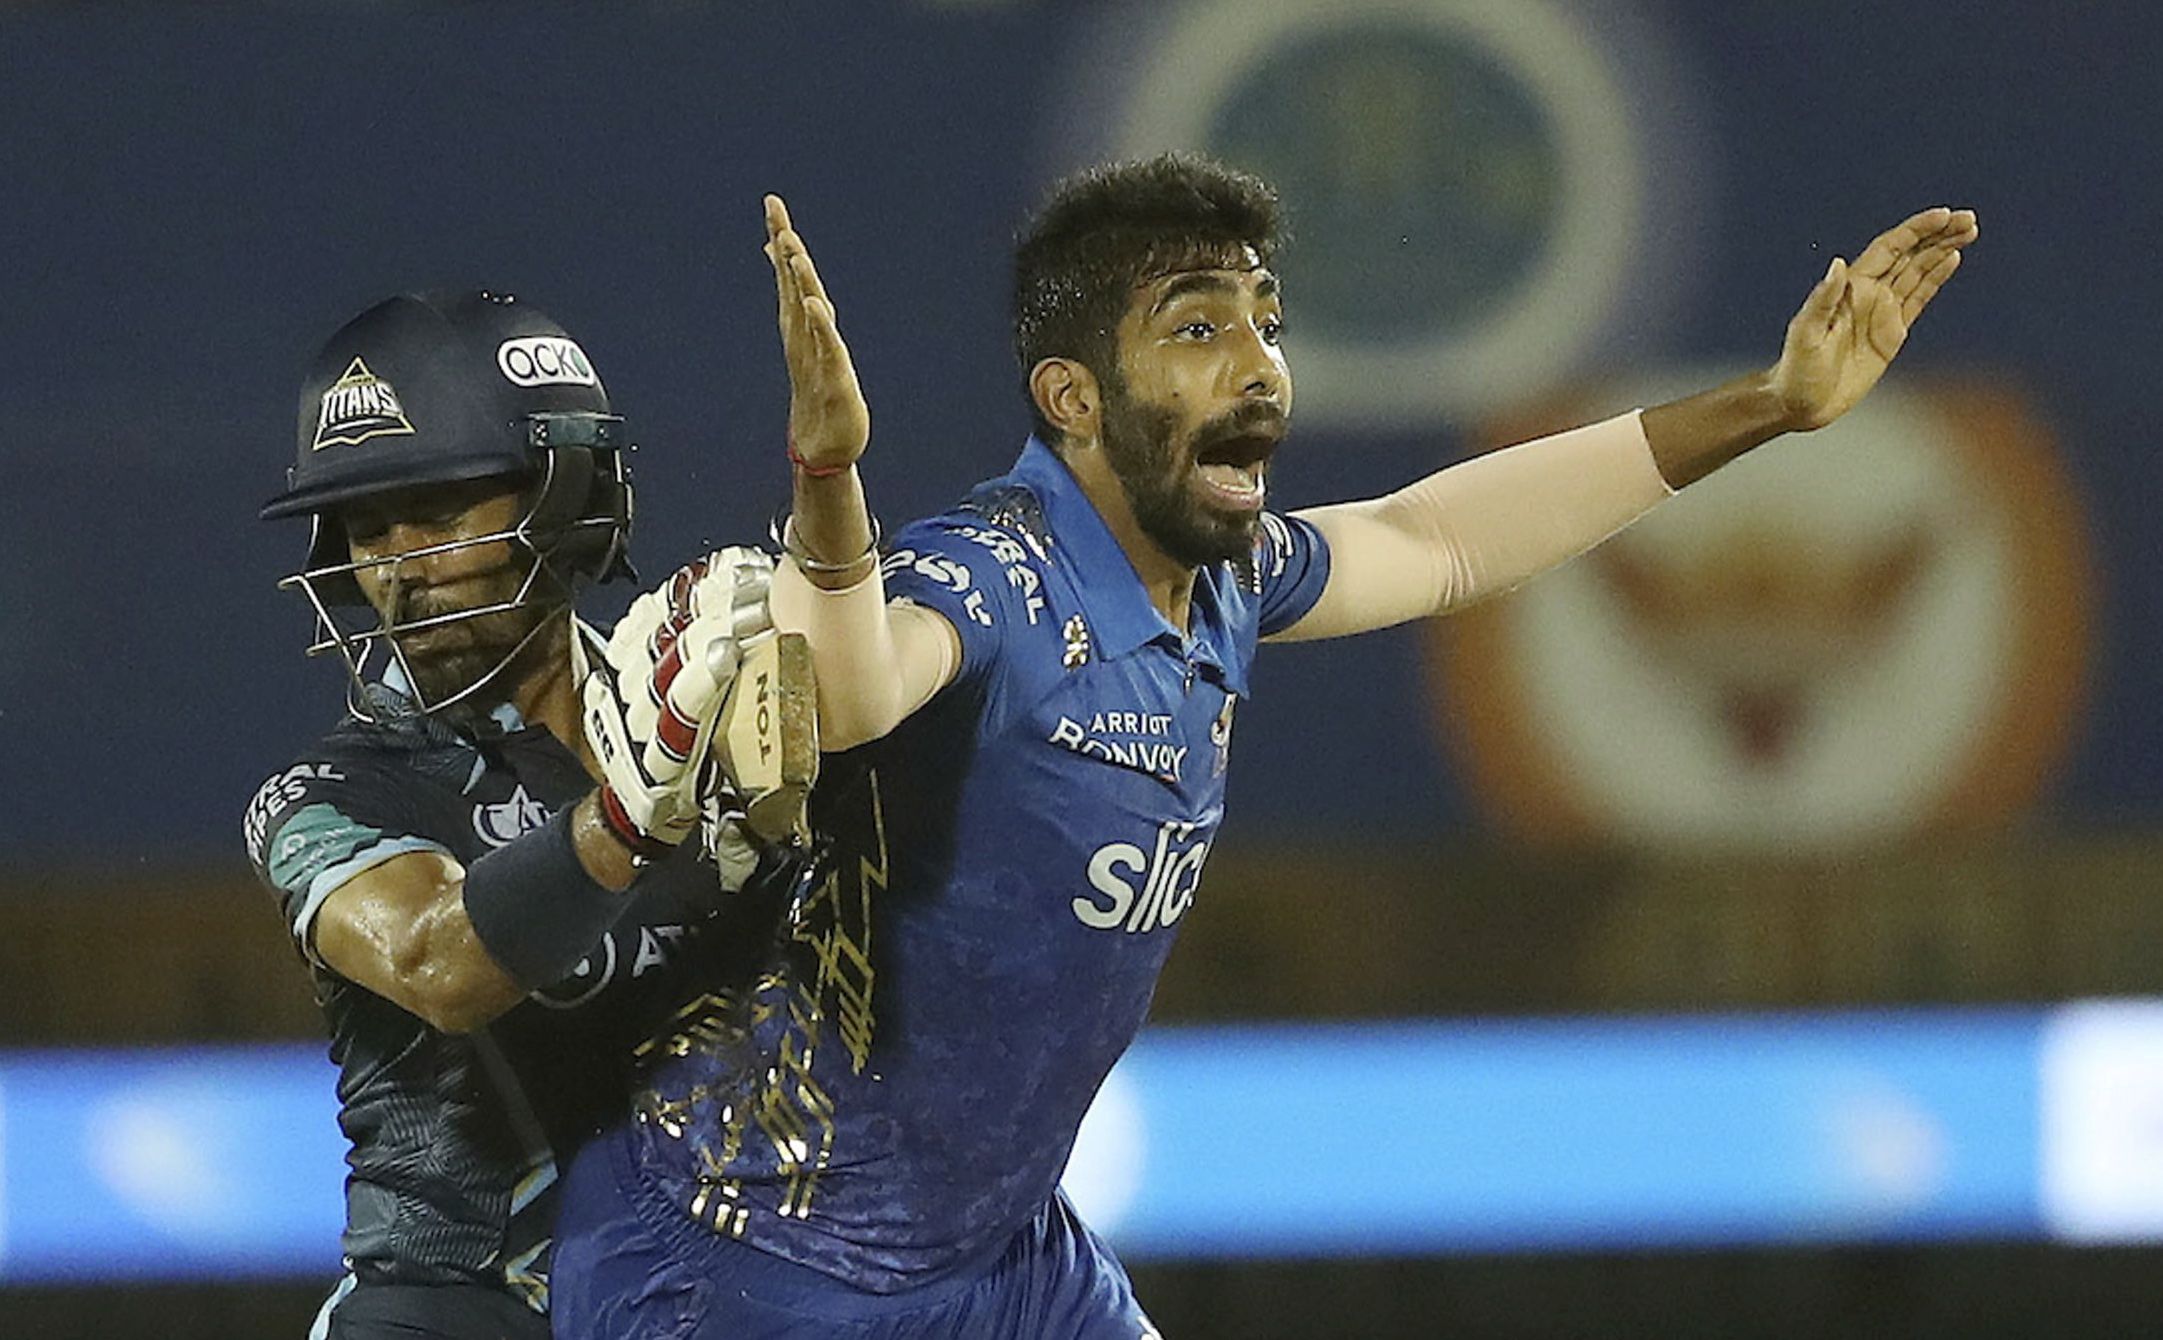 With 2 wickets, Bumrah will become 1st India pacer to huge T20 landmark